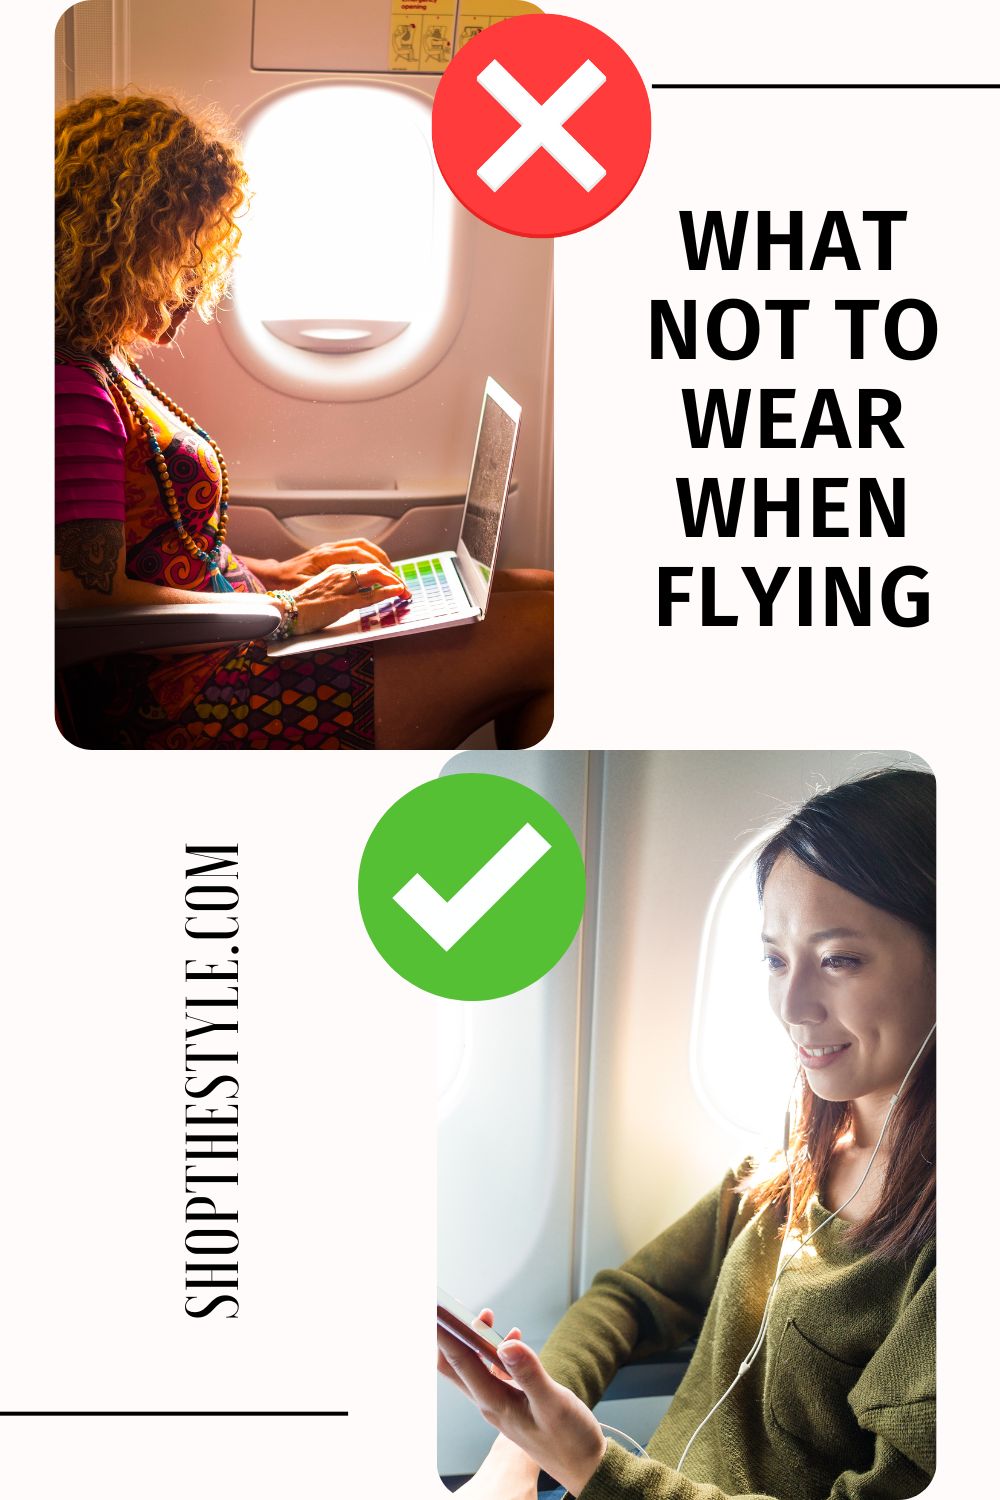 What NOT To Wear When Flying